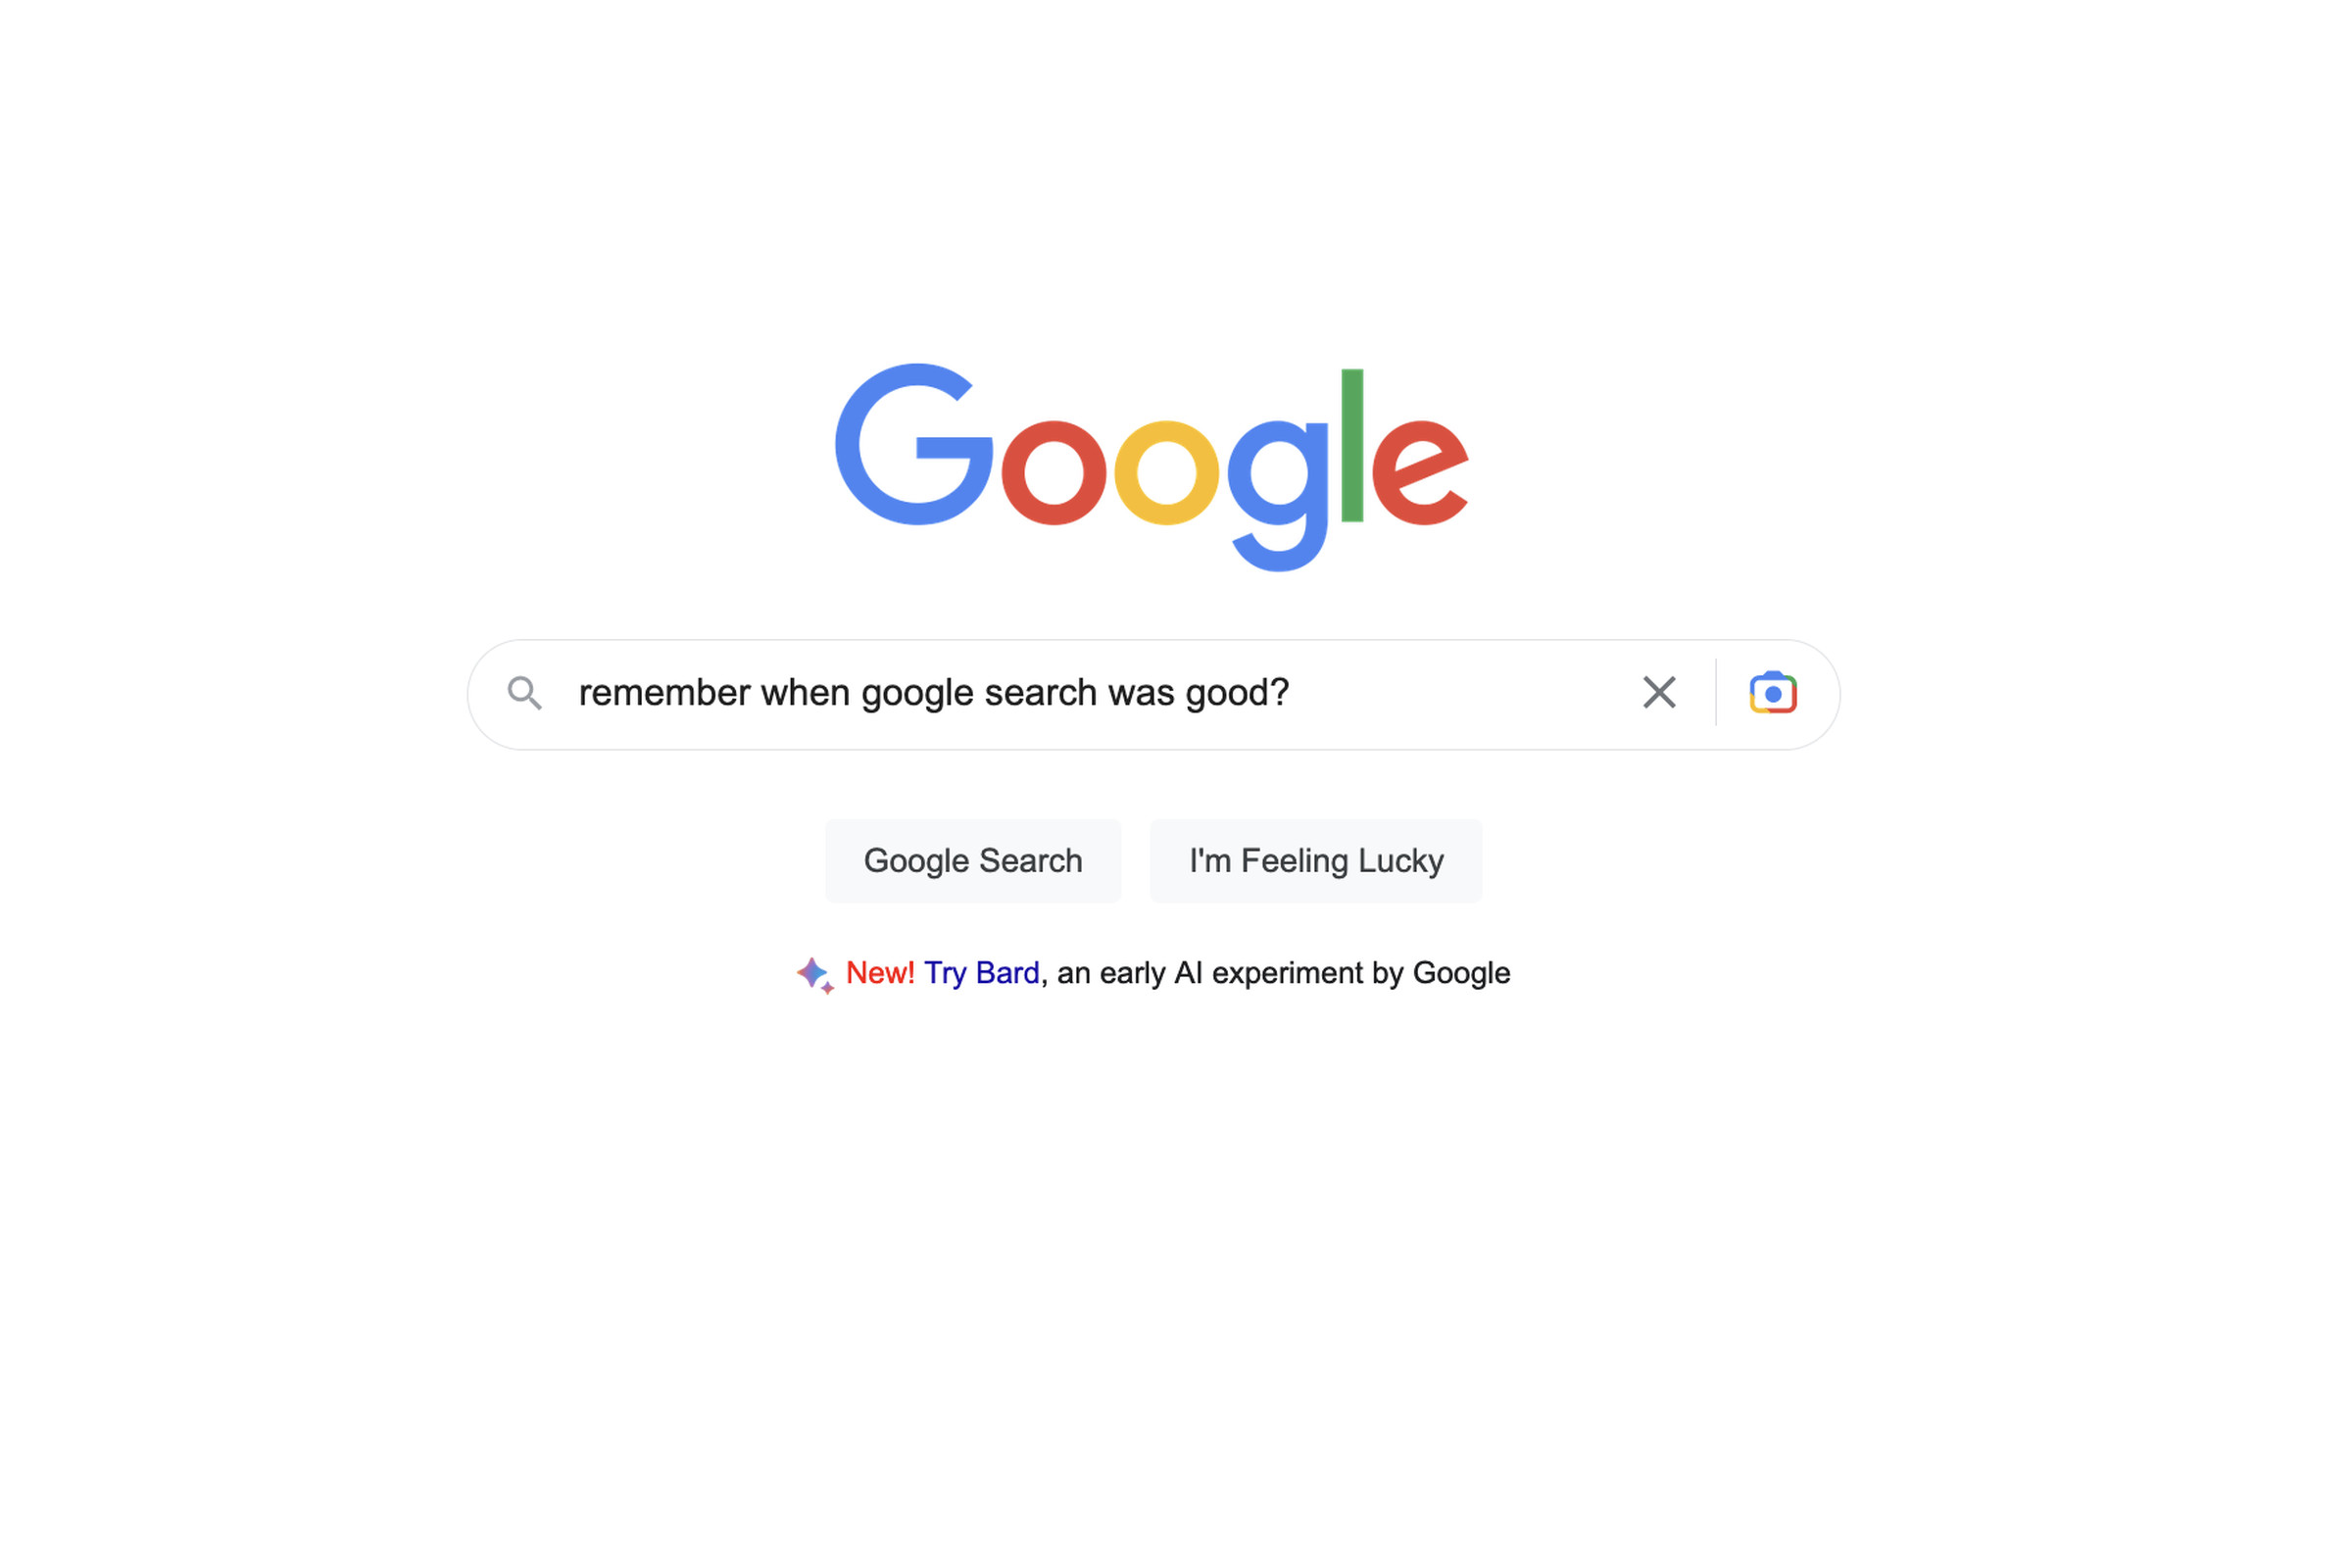 A screenshot of a Google search query. The query is “remember when google search was good?”